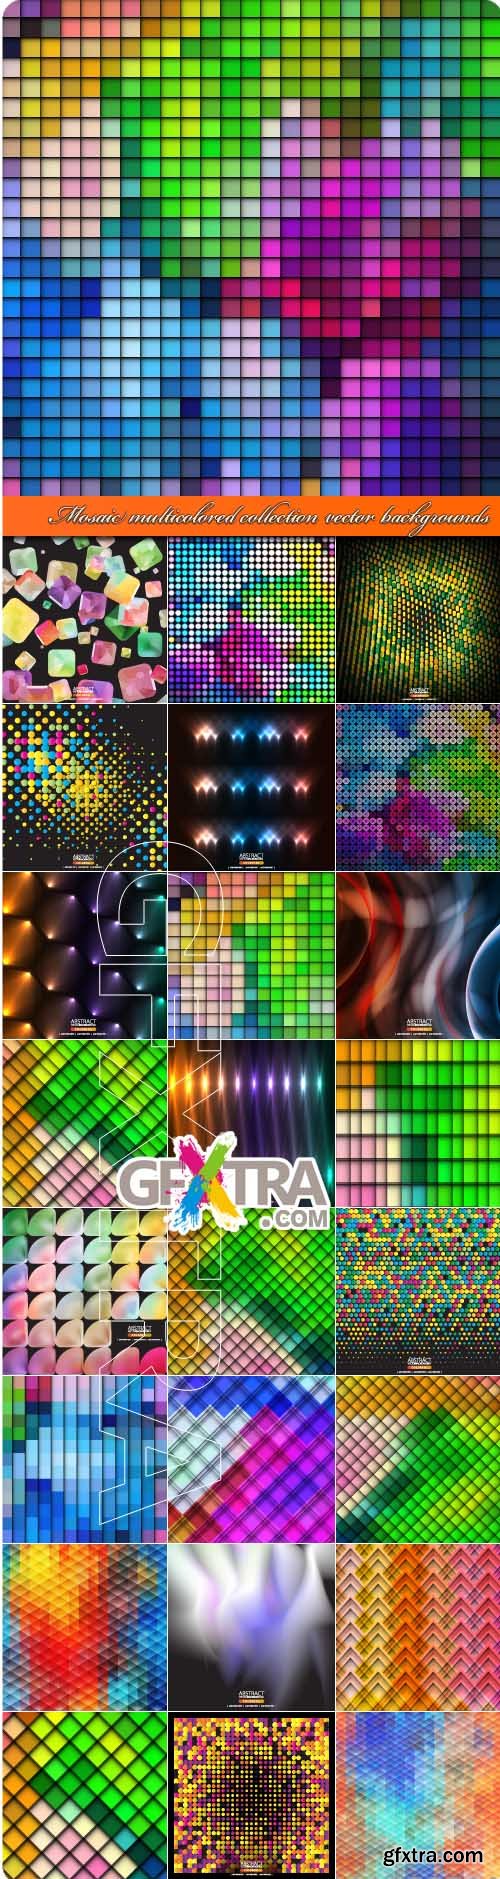 Mosaic multicolored collection vector backgrounds